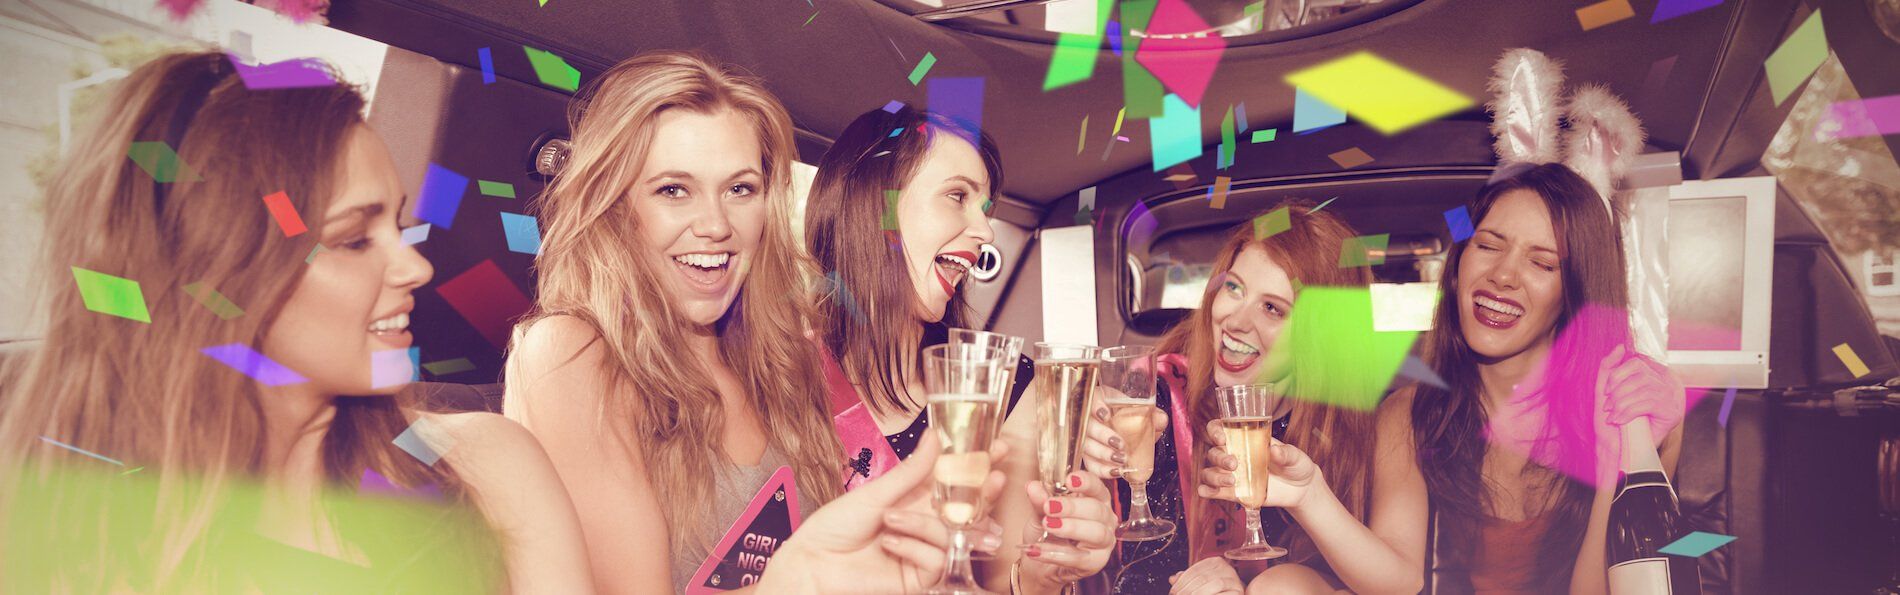 Limo Rental For Bachelor ans Bachelorette Parties in Seattle